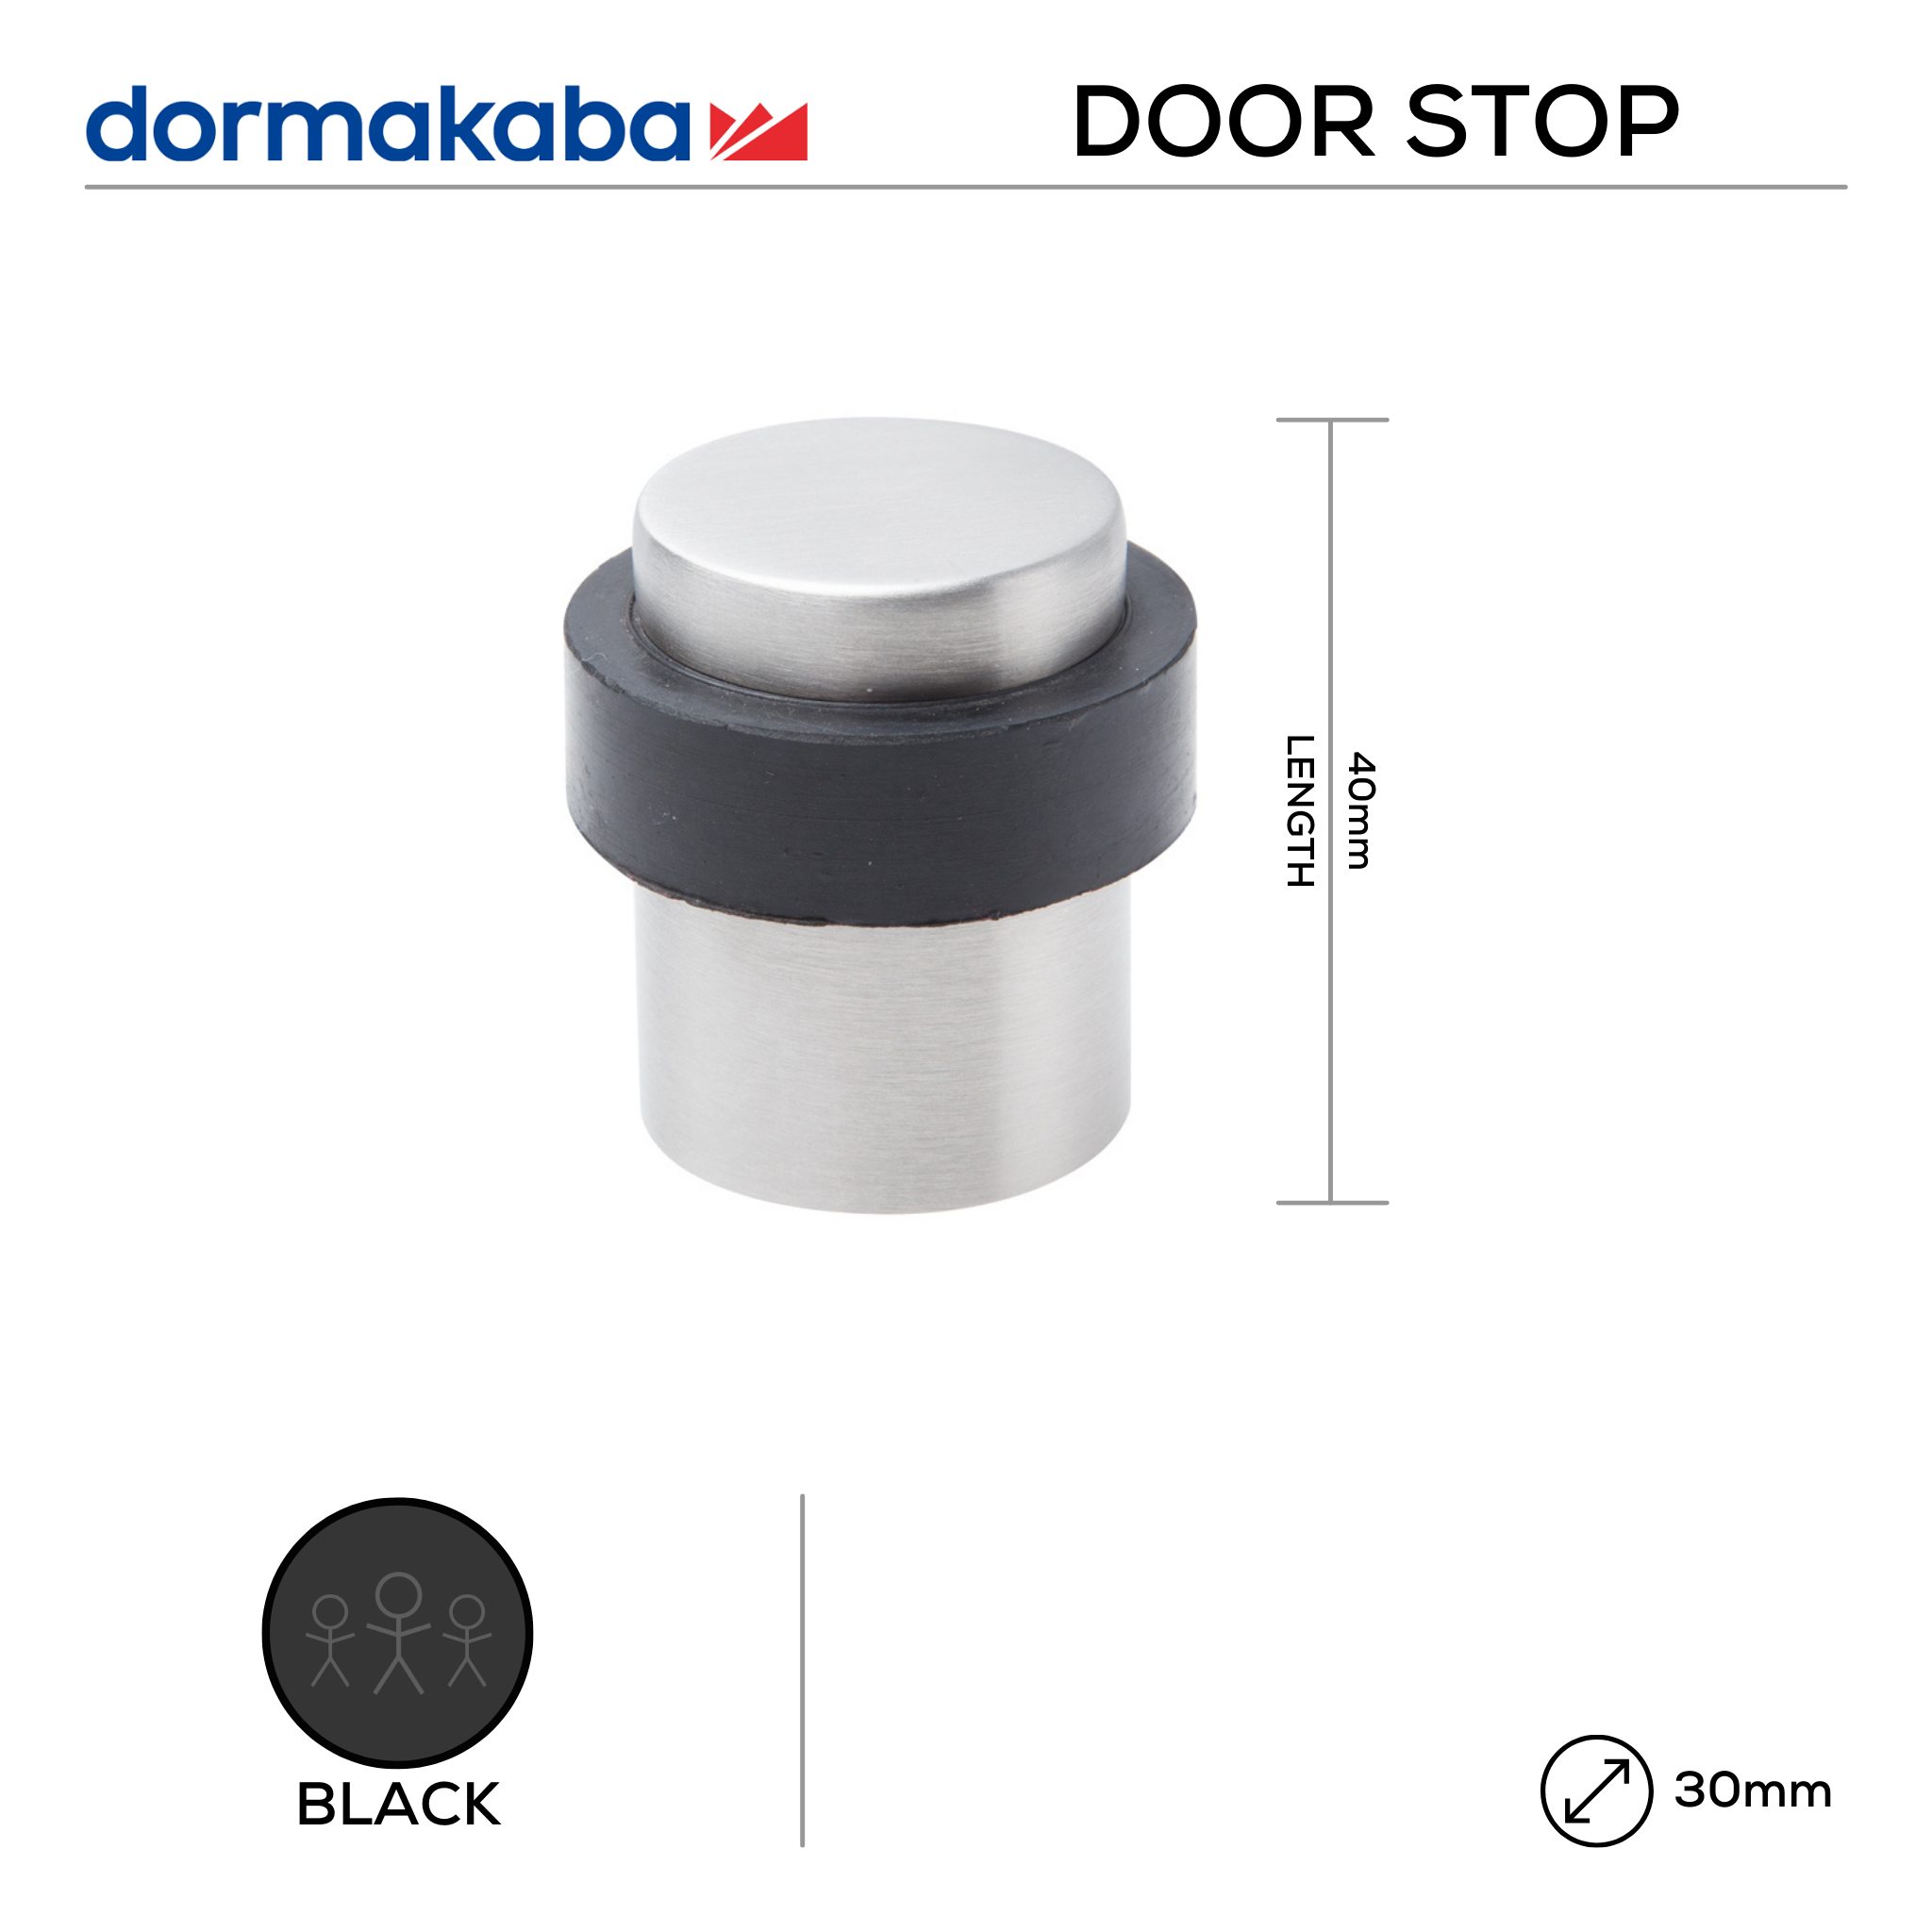 DDS-PVD-021 Black EP, Door Stop, Floor Mounted, Cylindical, 40mm (l) x 30mm (Ø) x 38mm (t), PVD Black, DORMAKABA